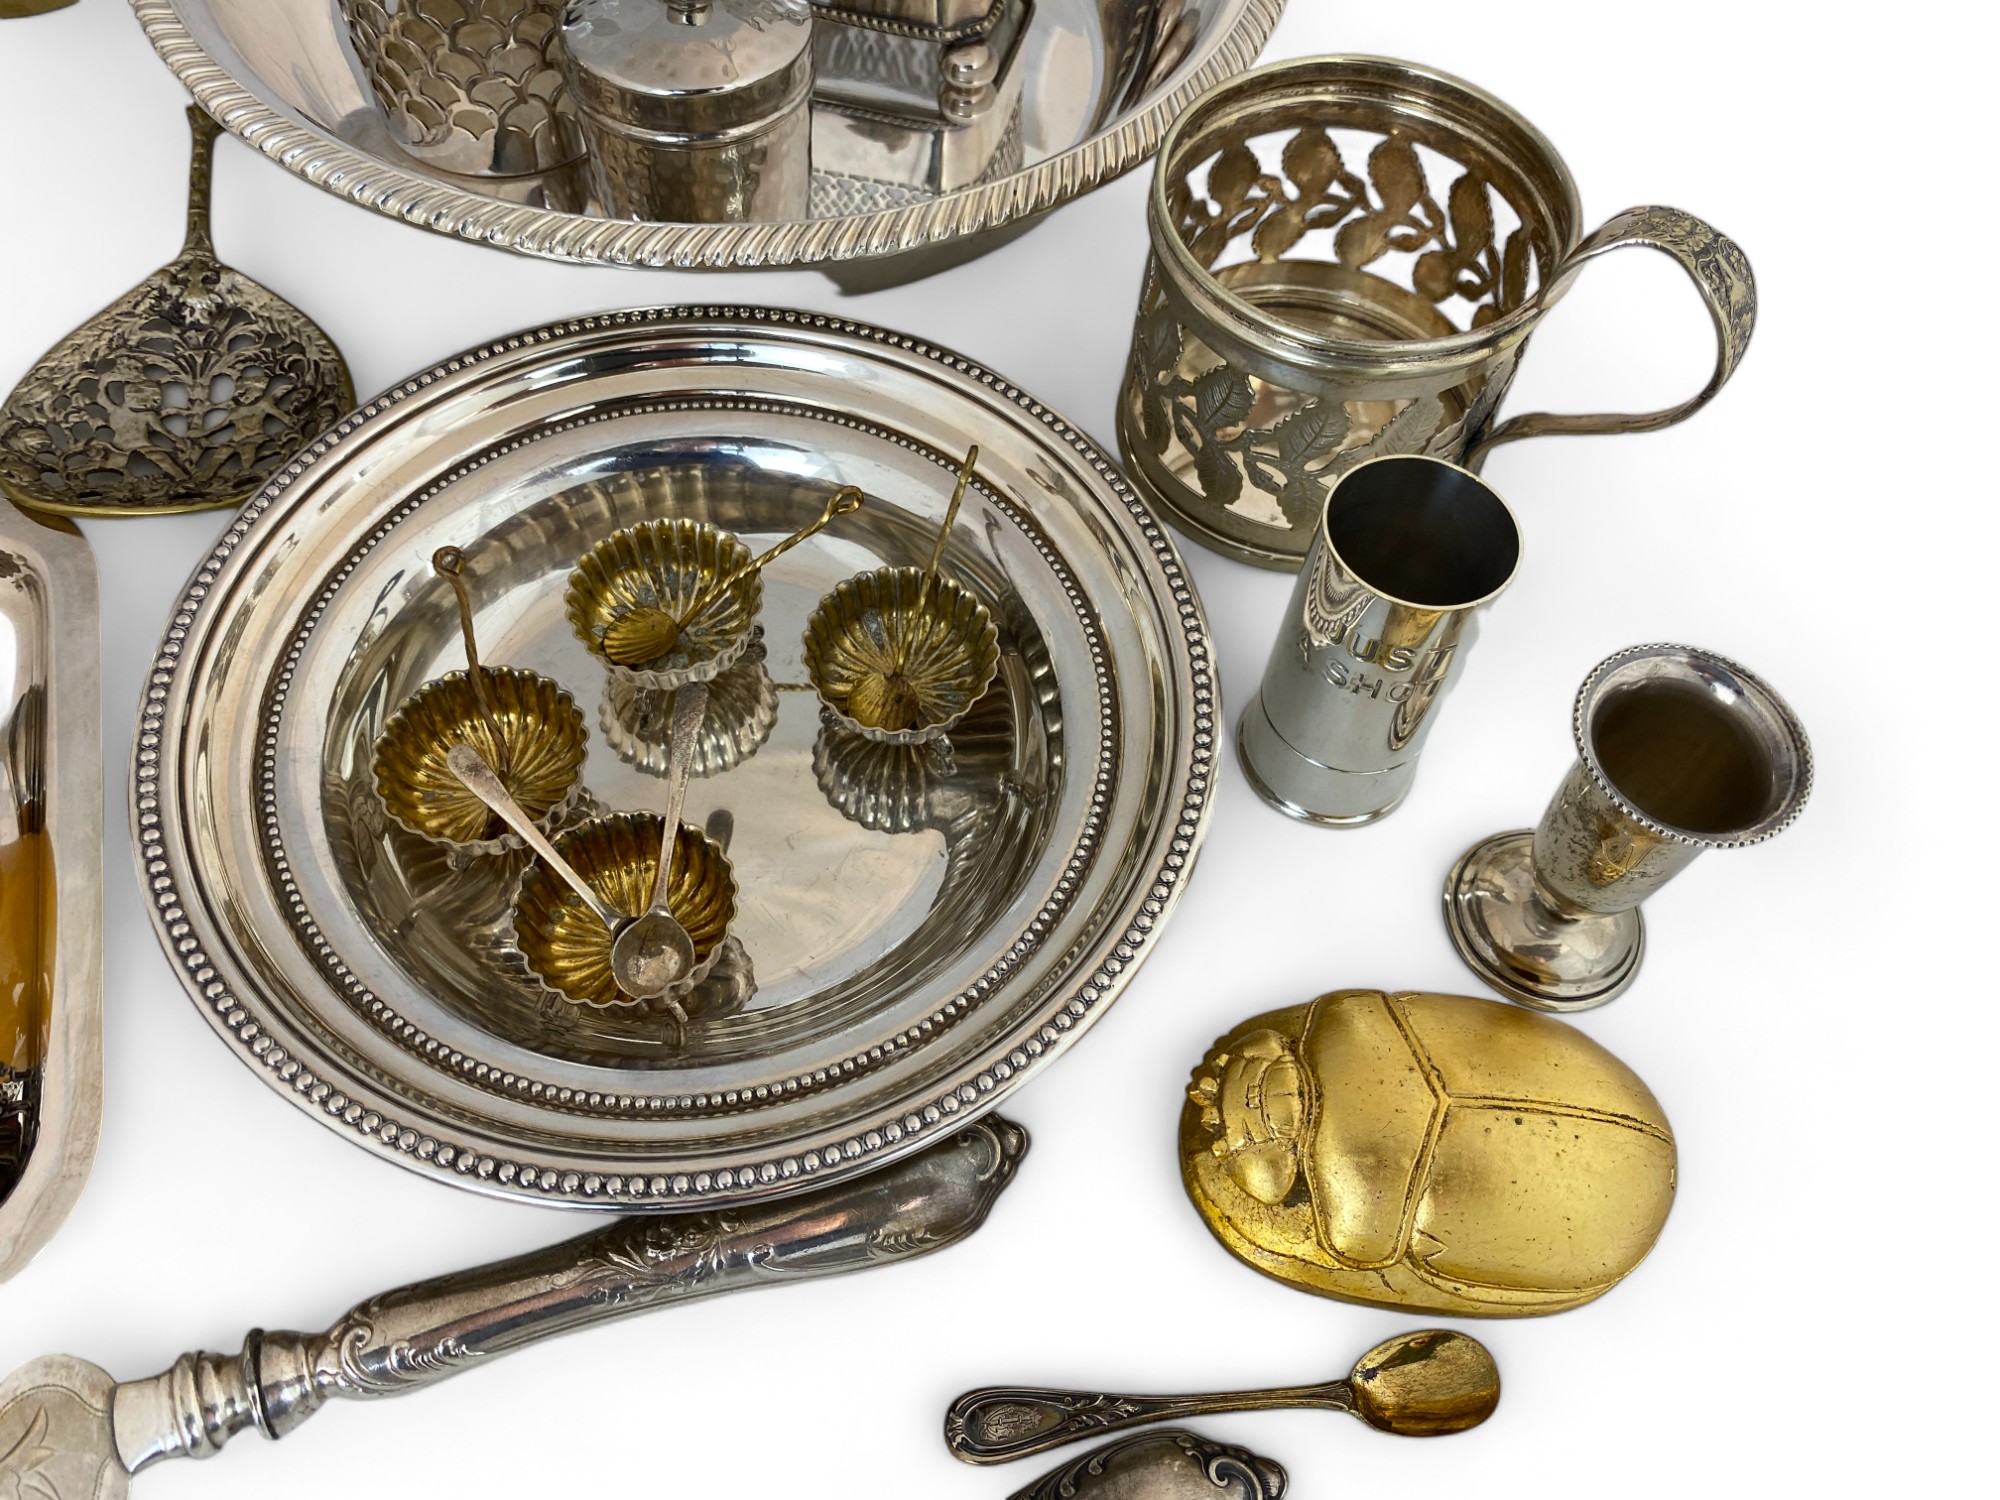 A group lot of silver plate and objects de vertu - Image 5 of 6